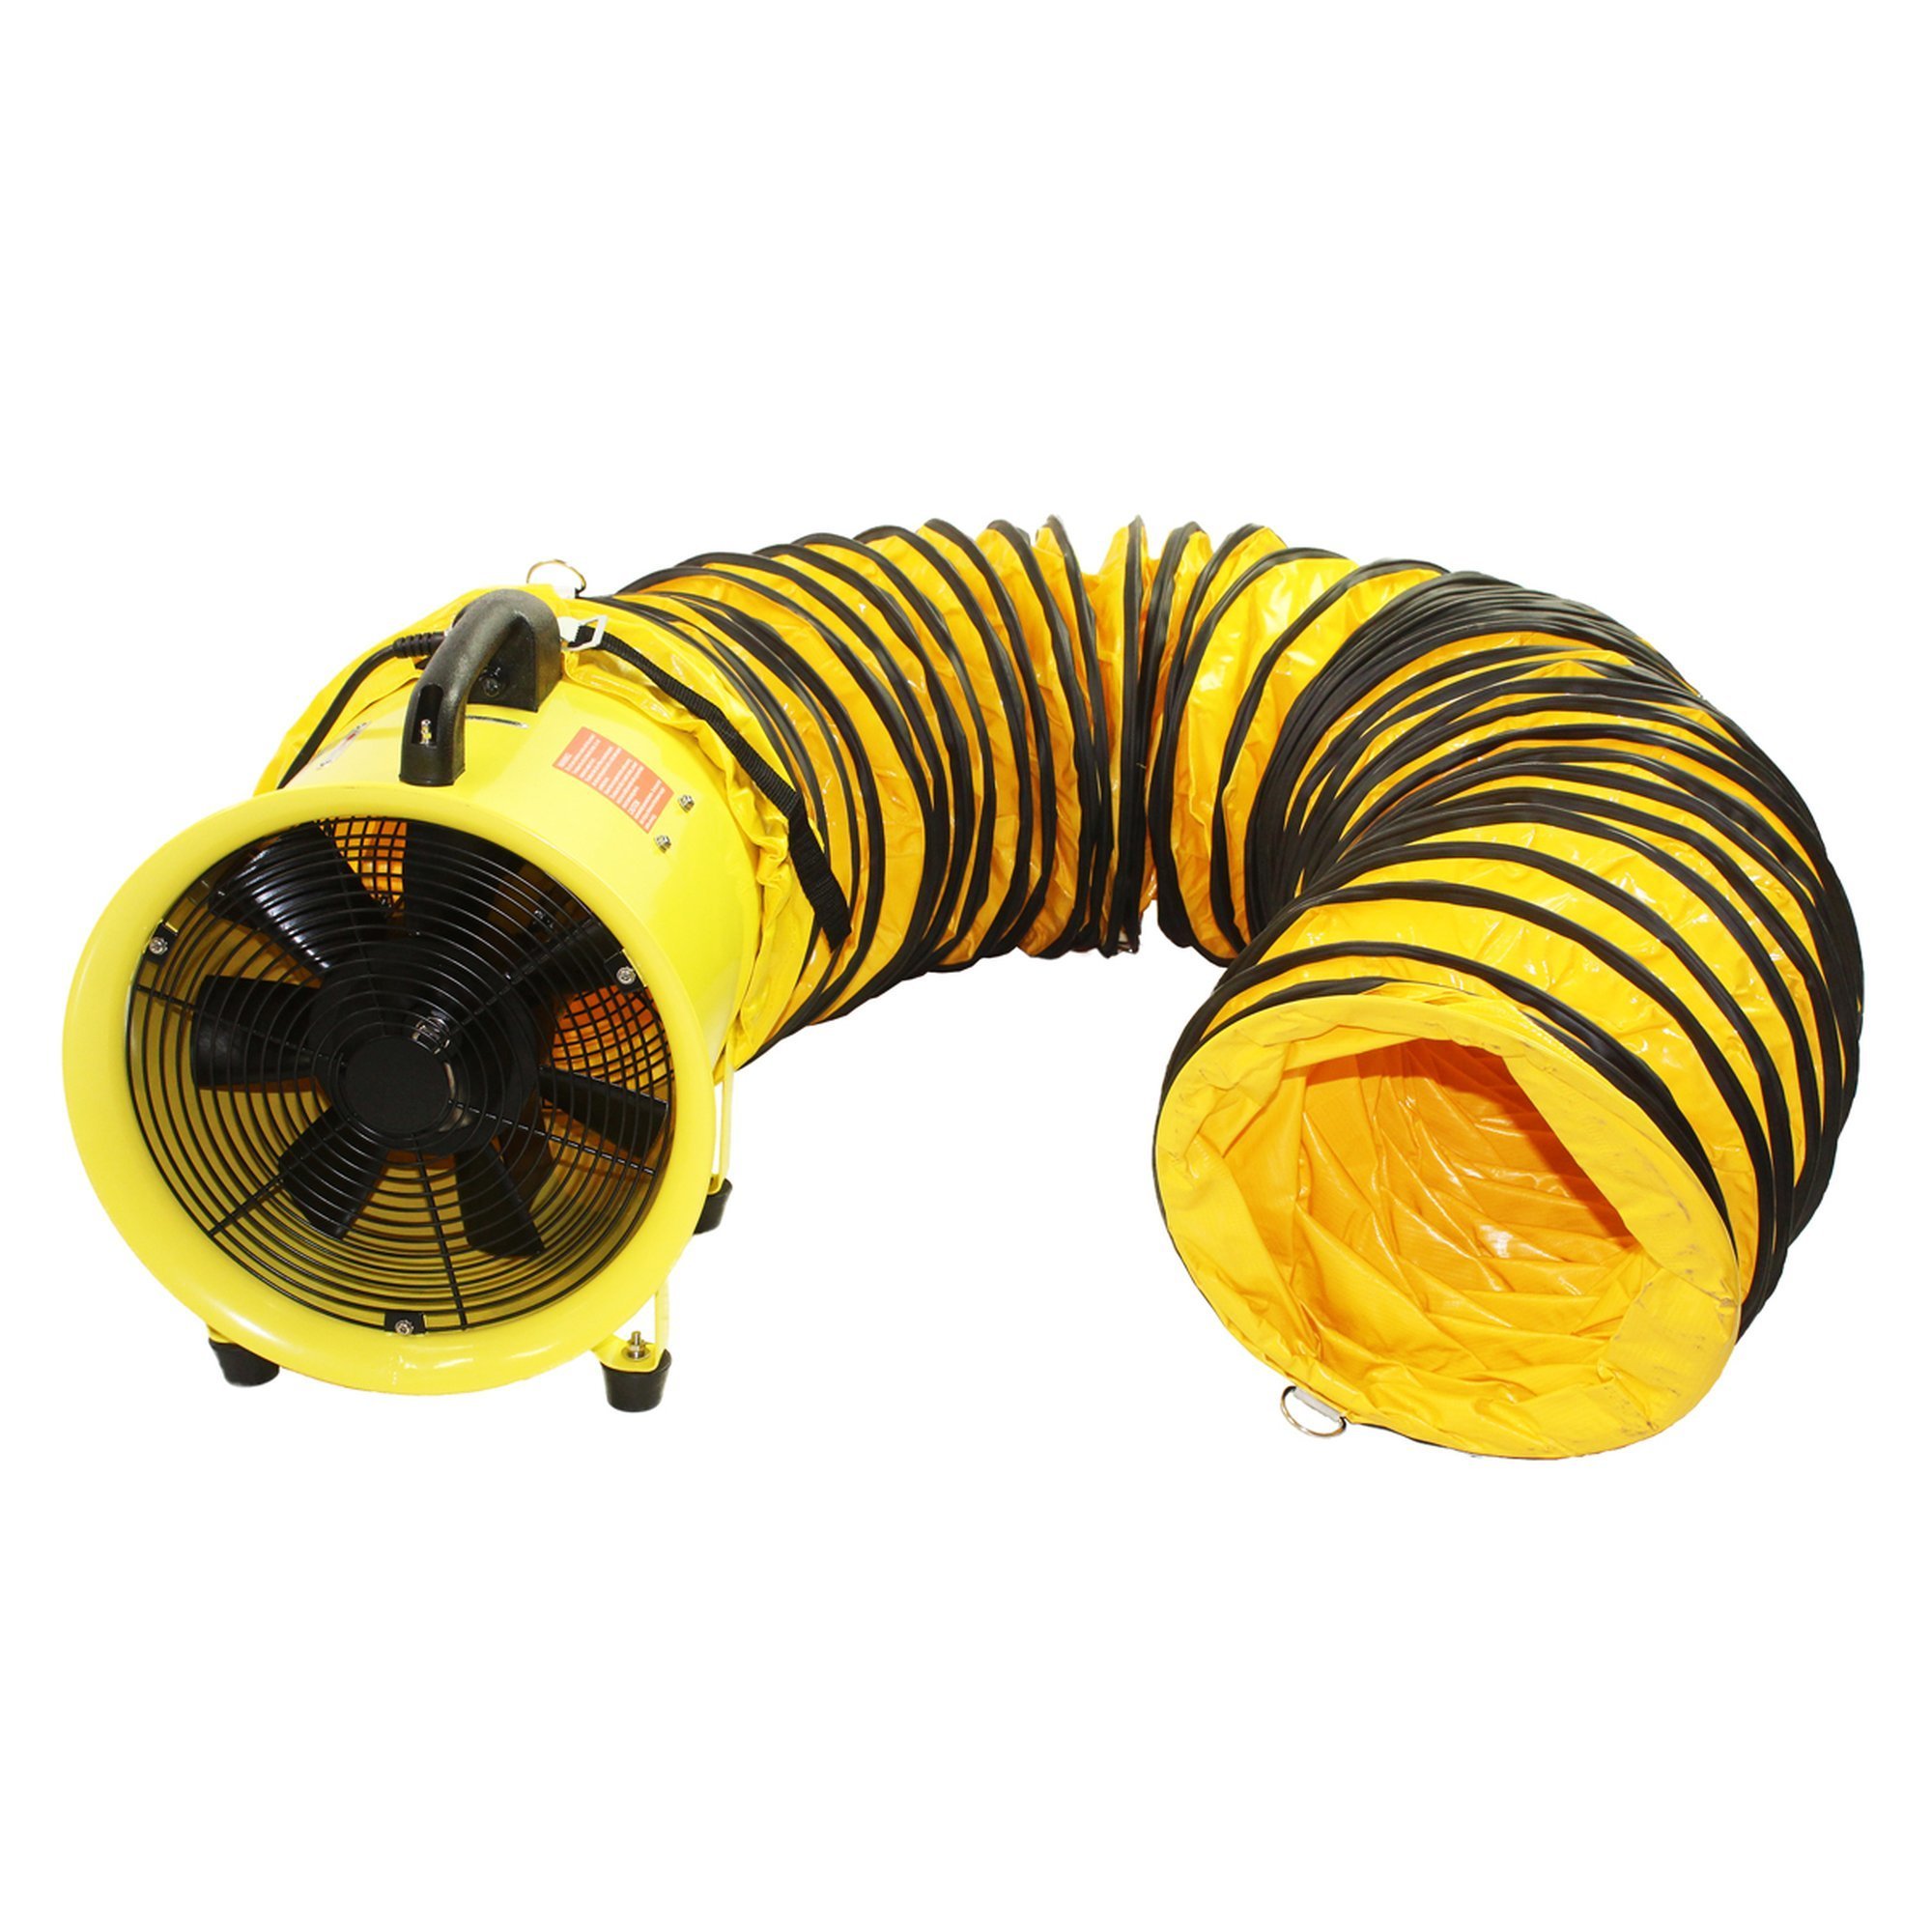 Maxx Air, 8Inch Axial Confined Space Ventilator with Hose, Fan Type Confined Space Fans, Air Delivery 900 cfm, Model HVHF 08COMBOUPS